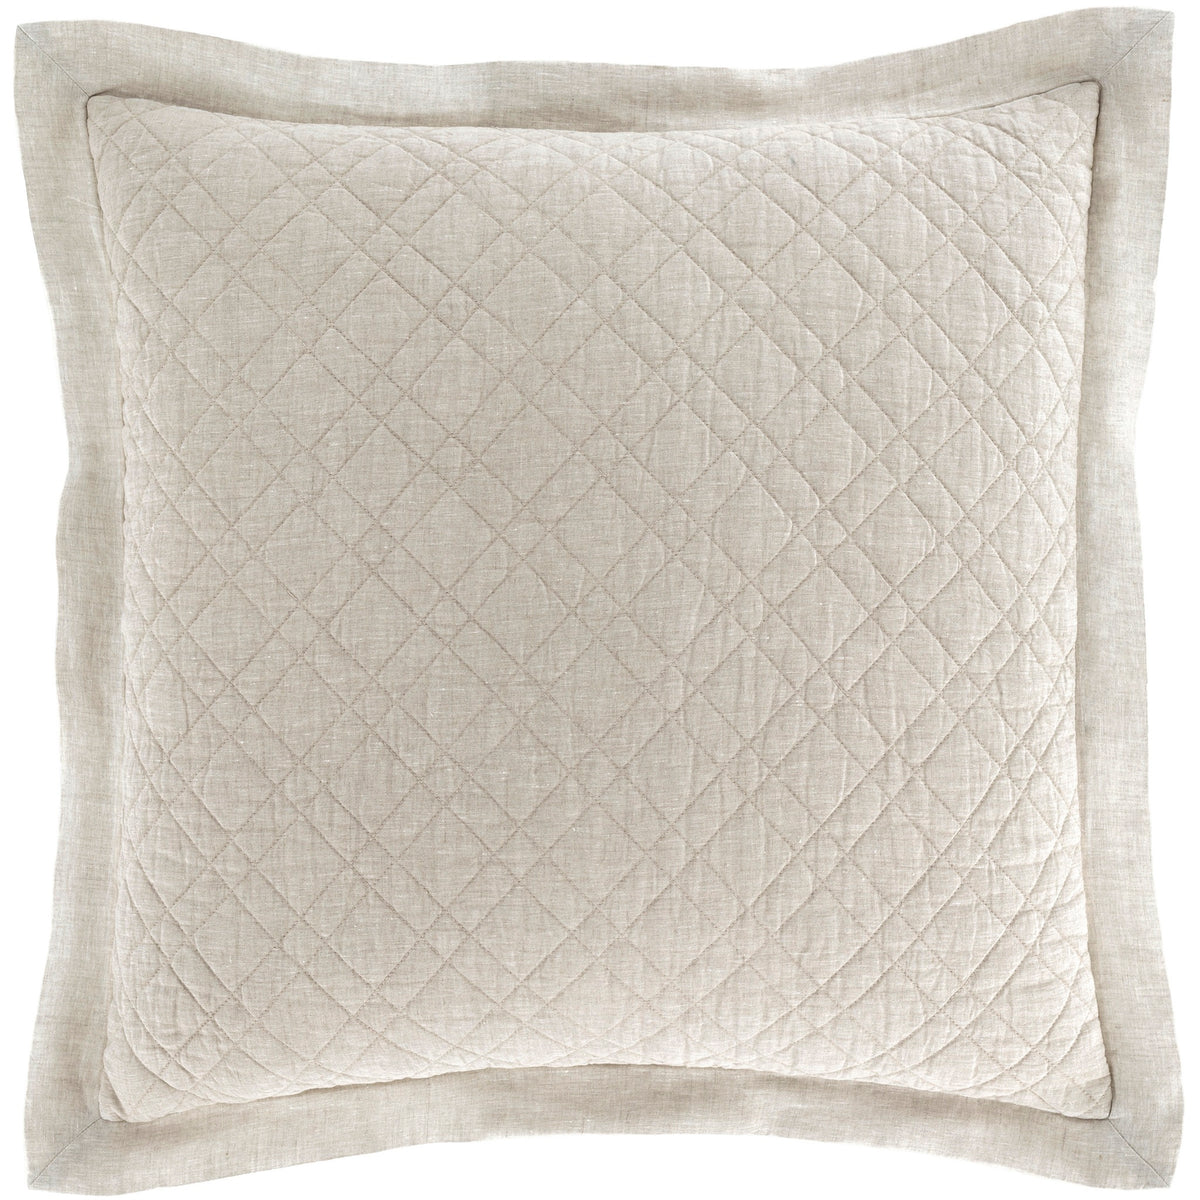 Euro Sham of Pine Cone Hill Washed Linen Quilted Bedding in Color Natural